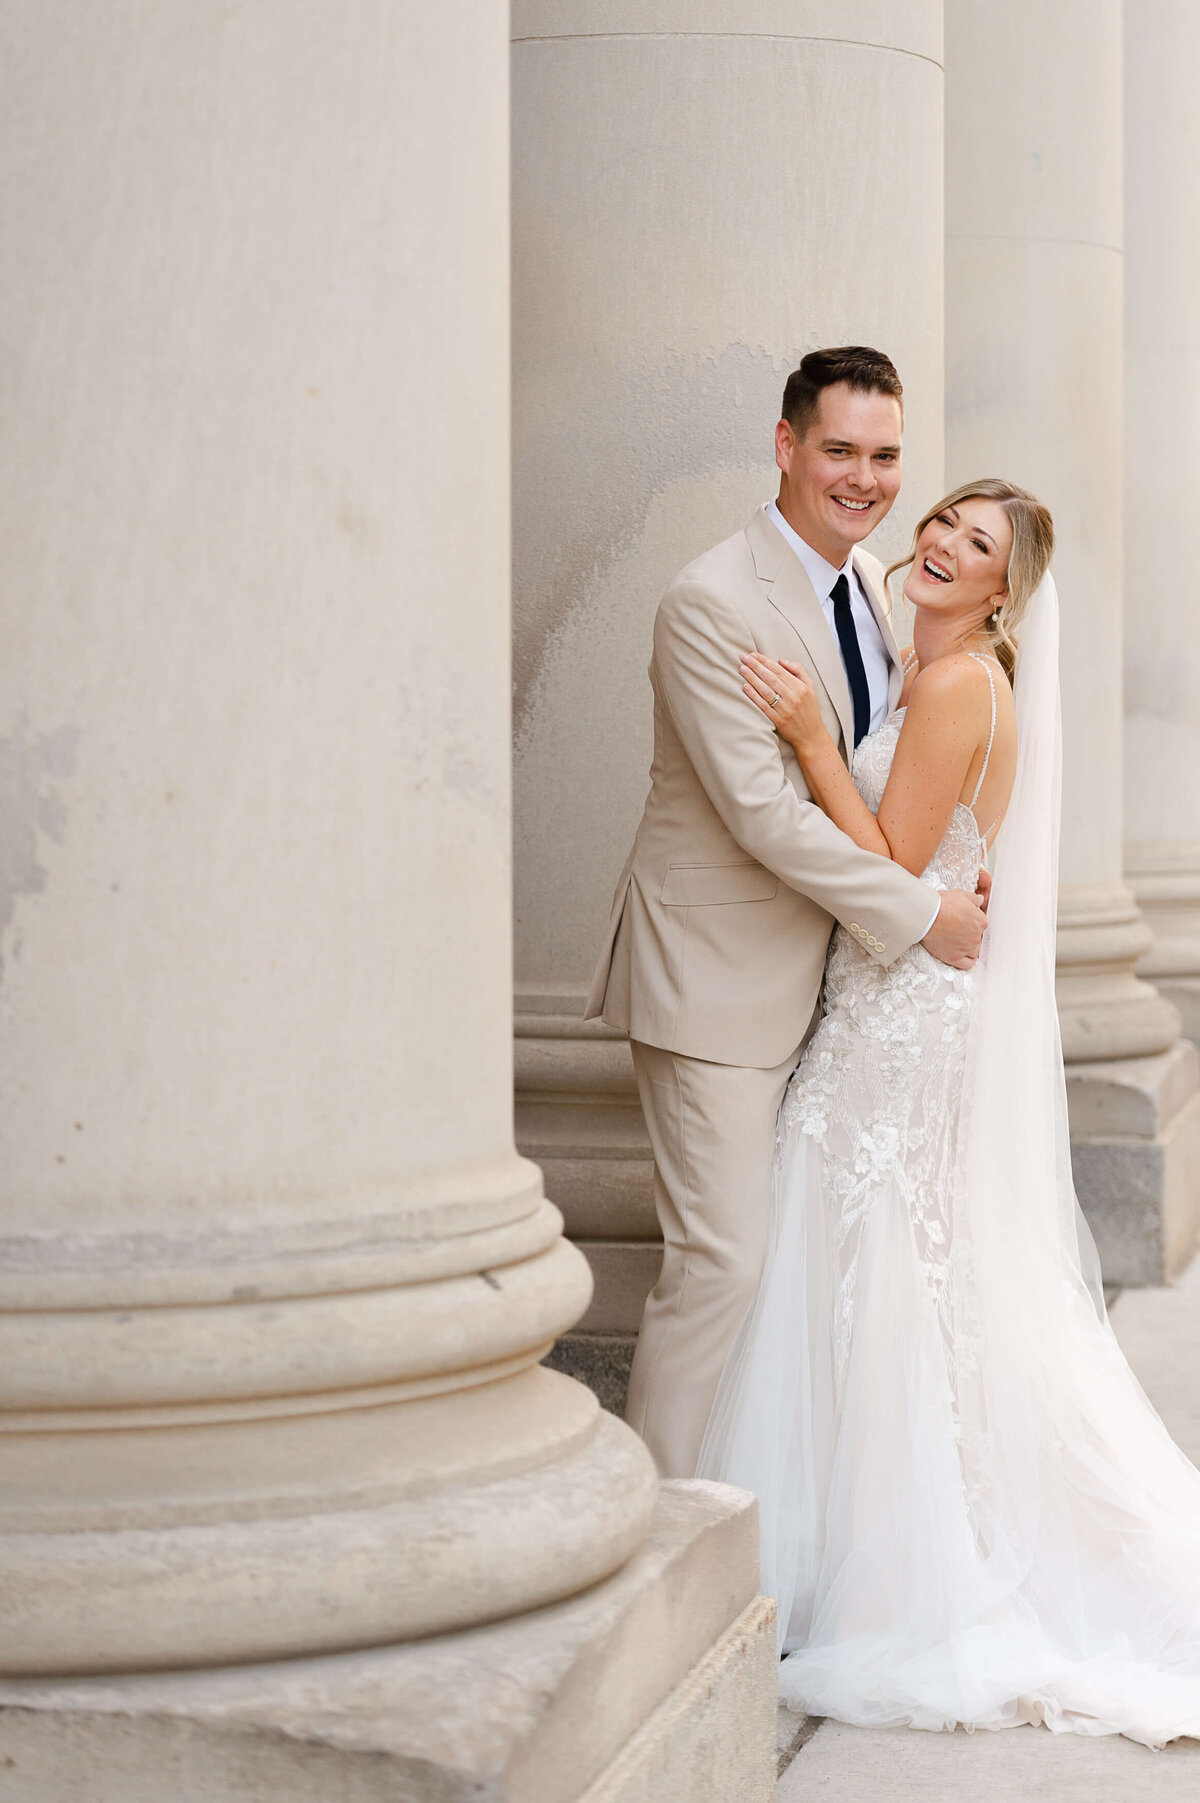 a full length photo of a bride and groom laughing and smiling together amongst the columns of the Chateau Laurier venue taken by Ottawa wedding photographer JEMMAN Photography